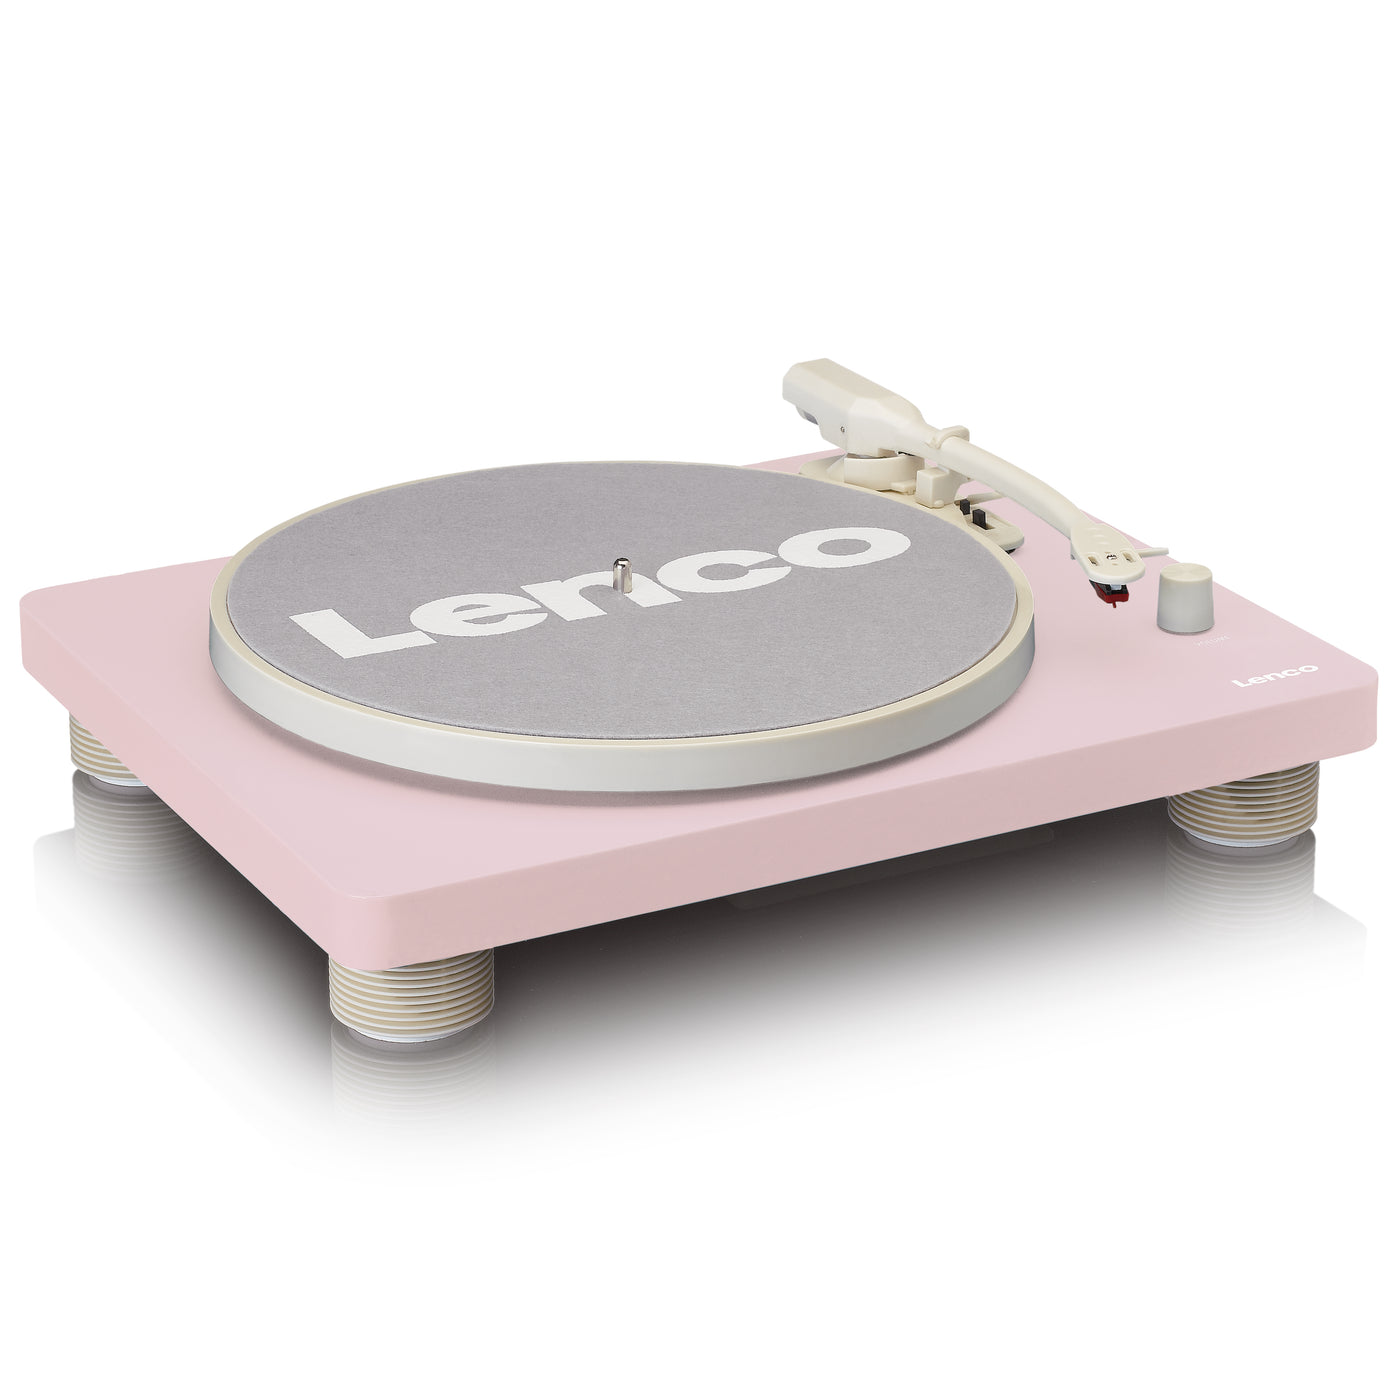 LENCO LS-50PK - Turntable with built-in speakers USB Encoding - Pink